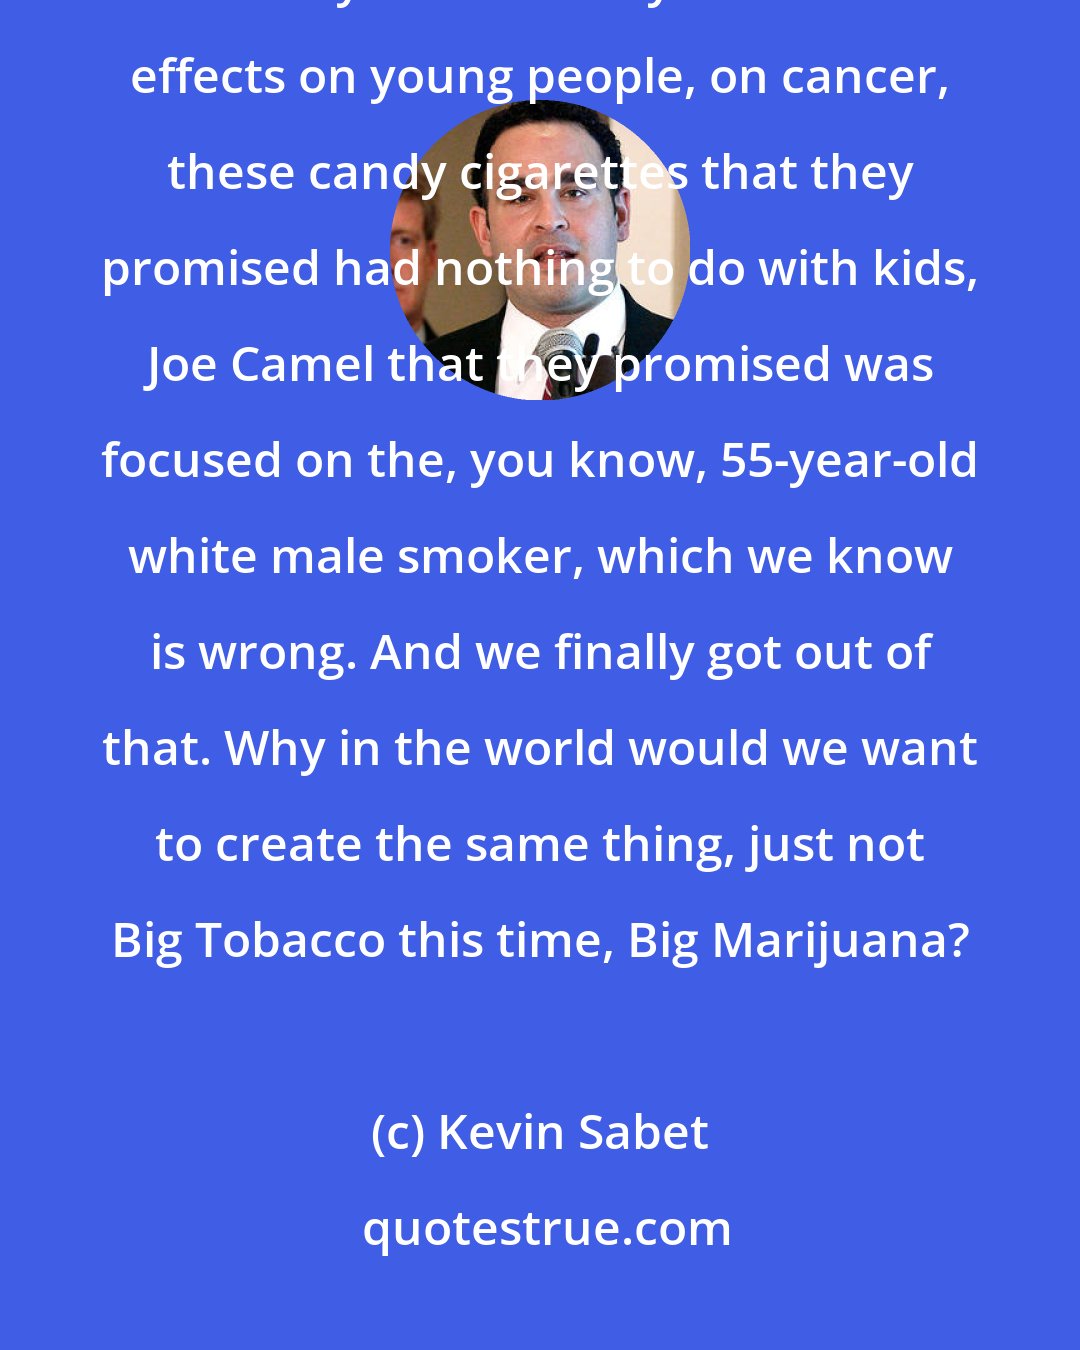 Kevin Sabet: We are just coming out of a 100-year stupor from being lied to by the tobacco industry for a century about the effects on young people, on cancer, these candy cigarettes that they promised had nothing to do with kids, Joe Camel that they promised was focused on the, you know, 55-year-old white male smoker, which we know is wrong. And we finally got out of that. Why in the world would we want to create the same thing, just not Big Tobacco this time, Big Marijuana?